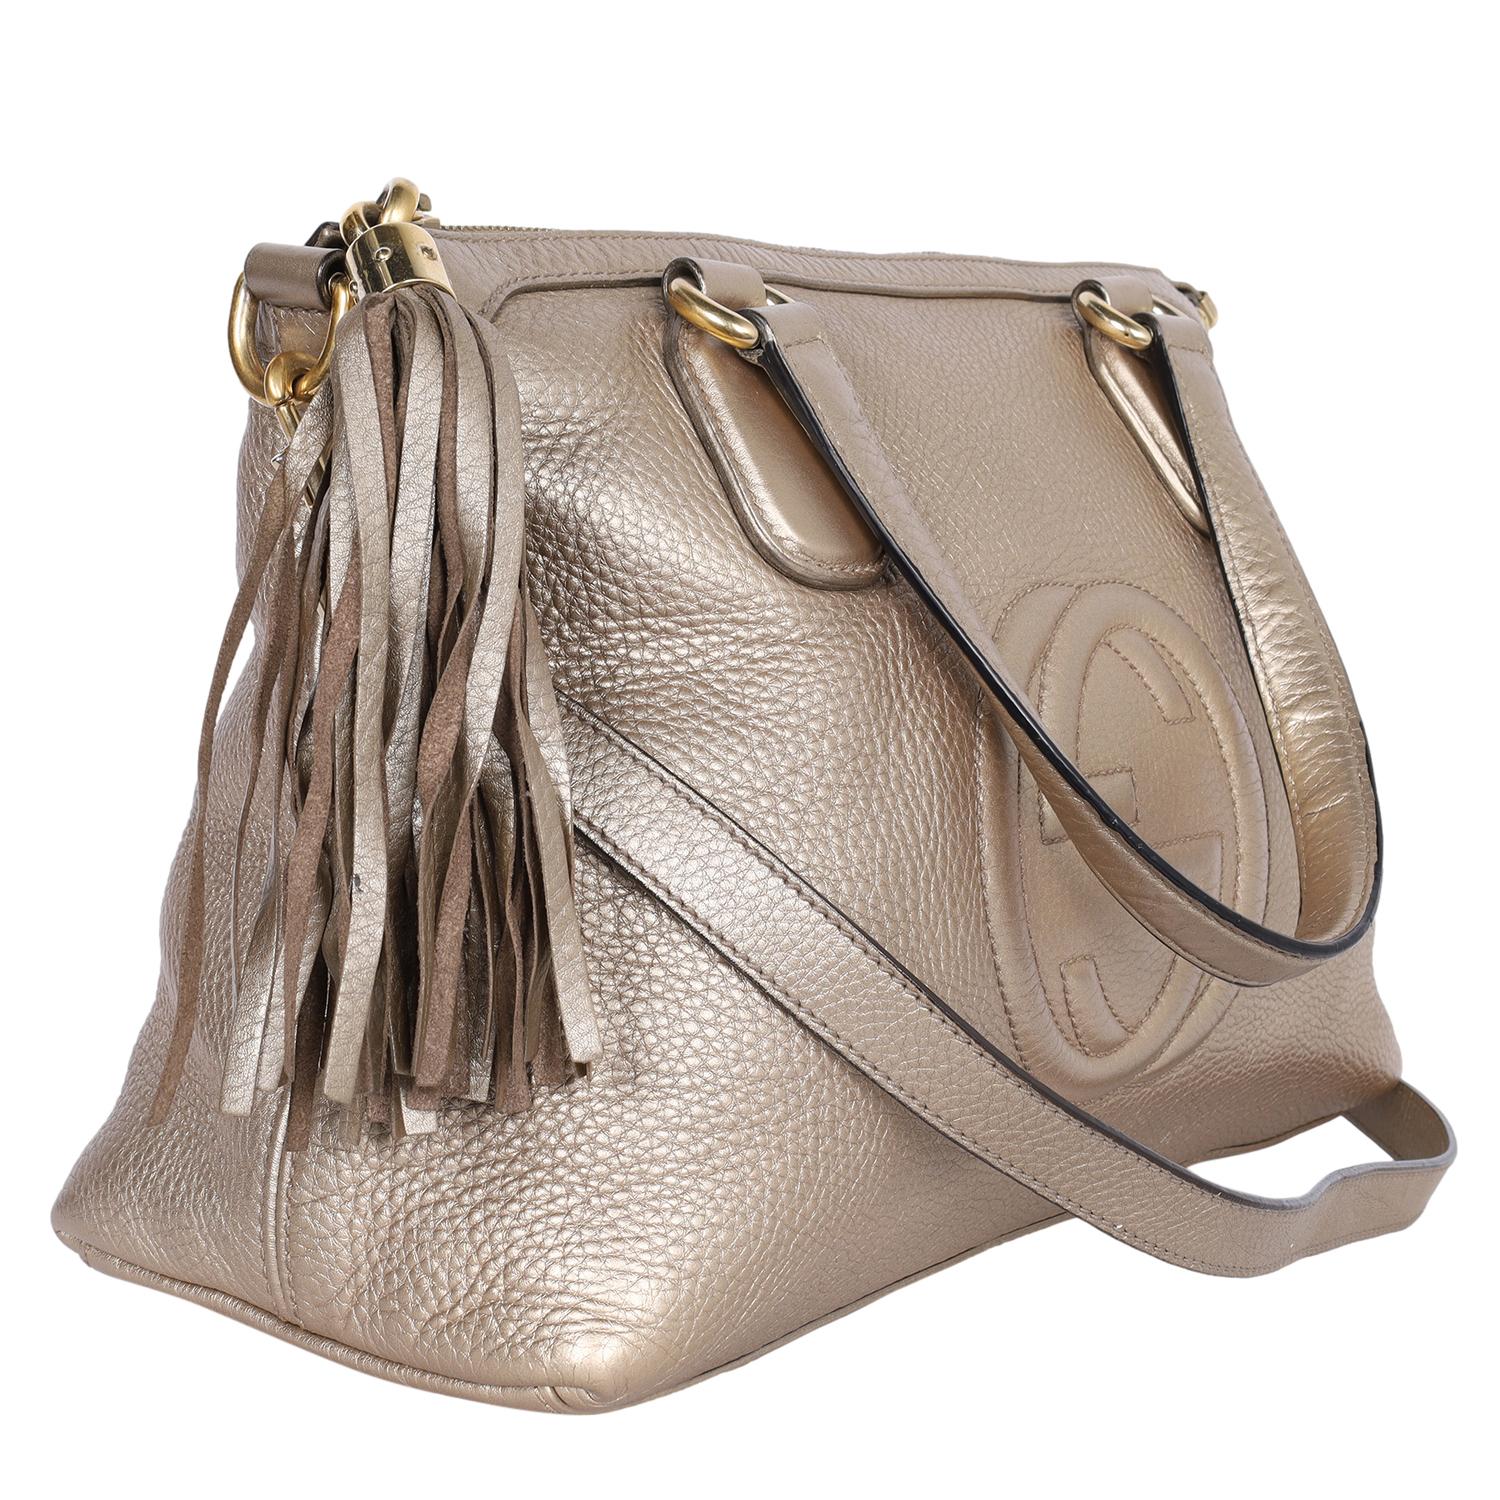 Women's Gucci Soho Metallic Gold Pebbled Calfskin Leather Top Handle Bag For Sale